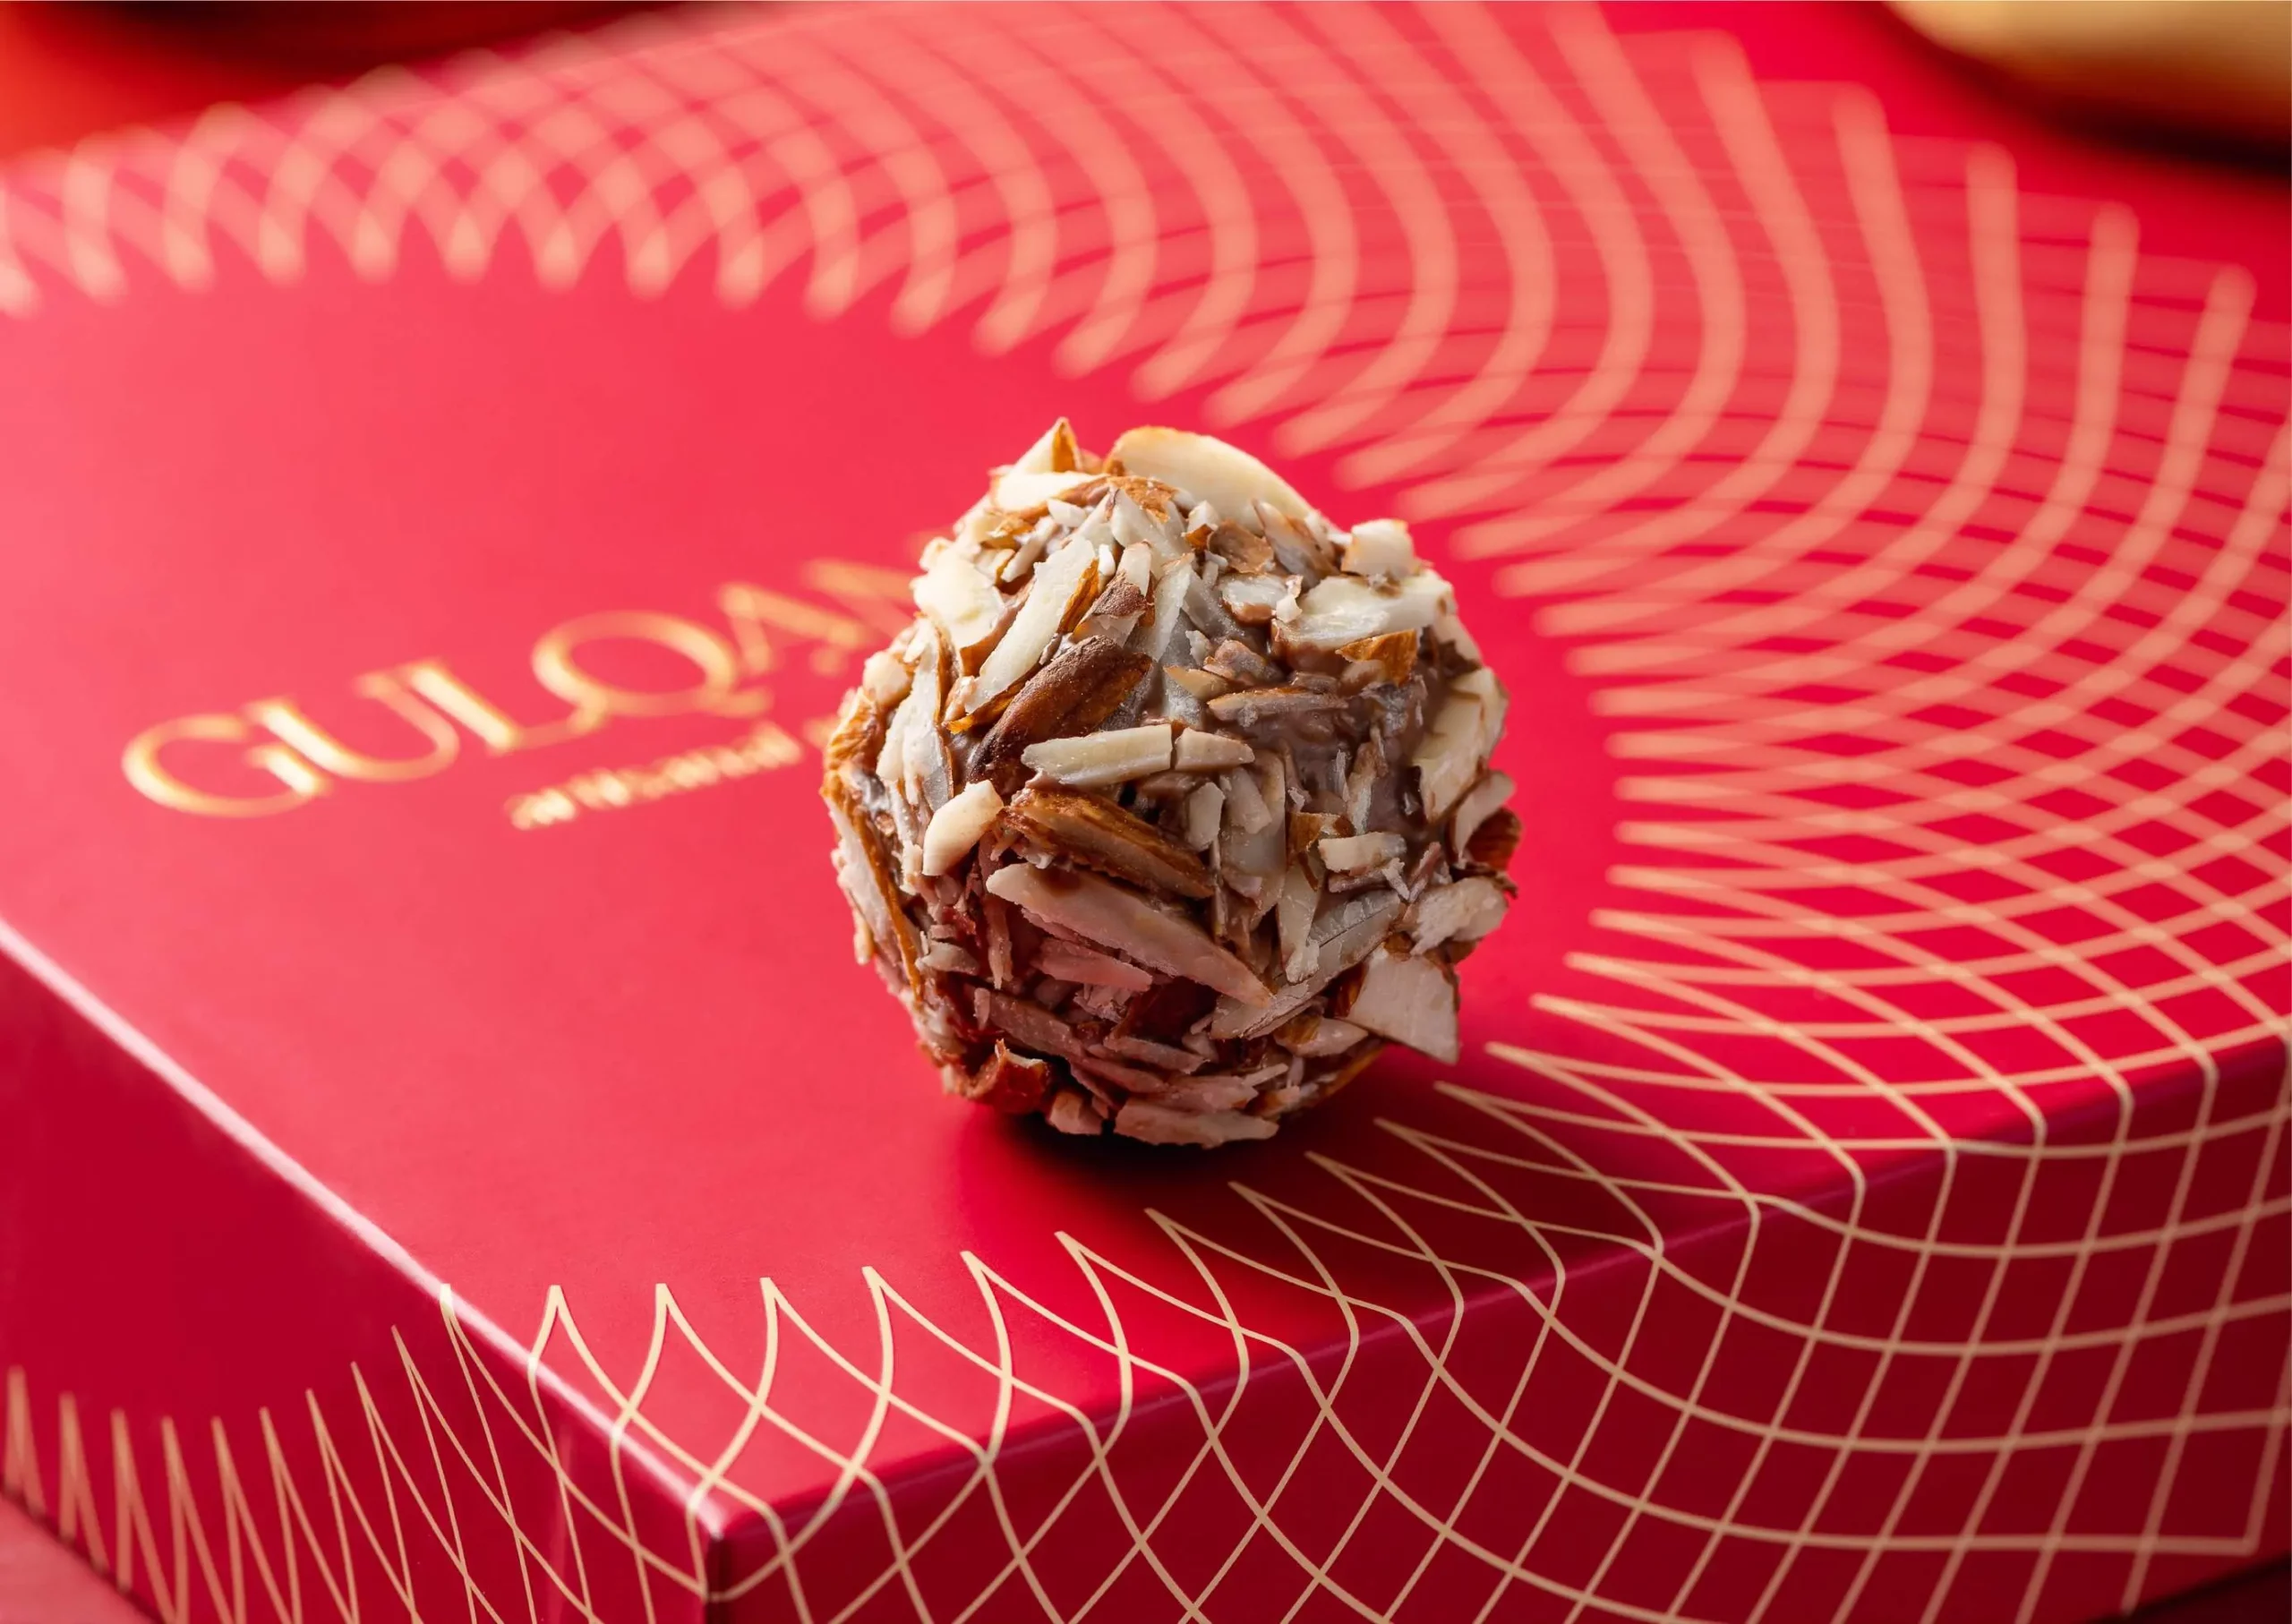 A chocolate ball sitting on top of a red box.